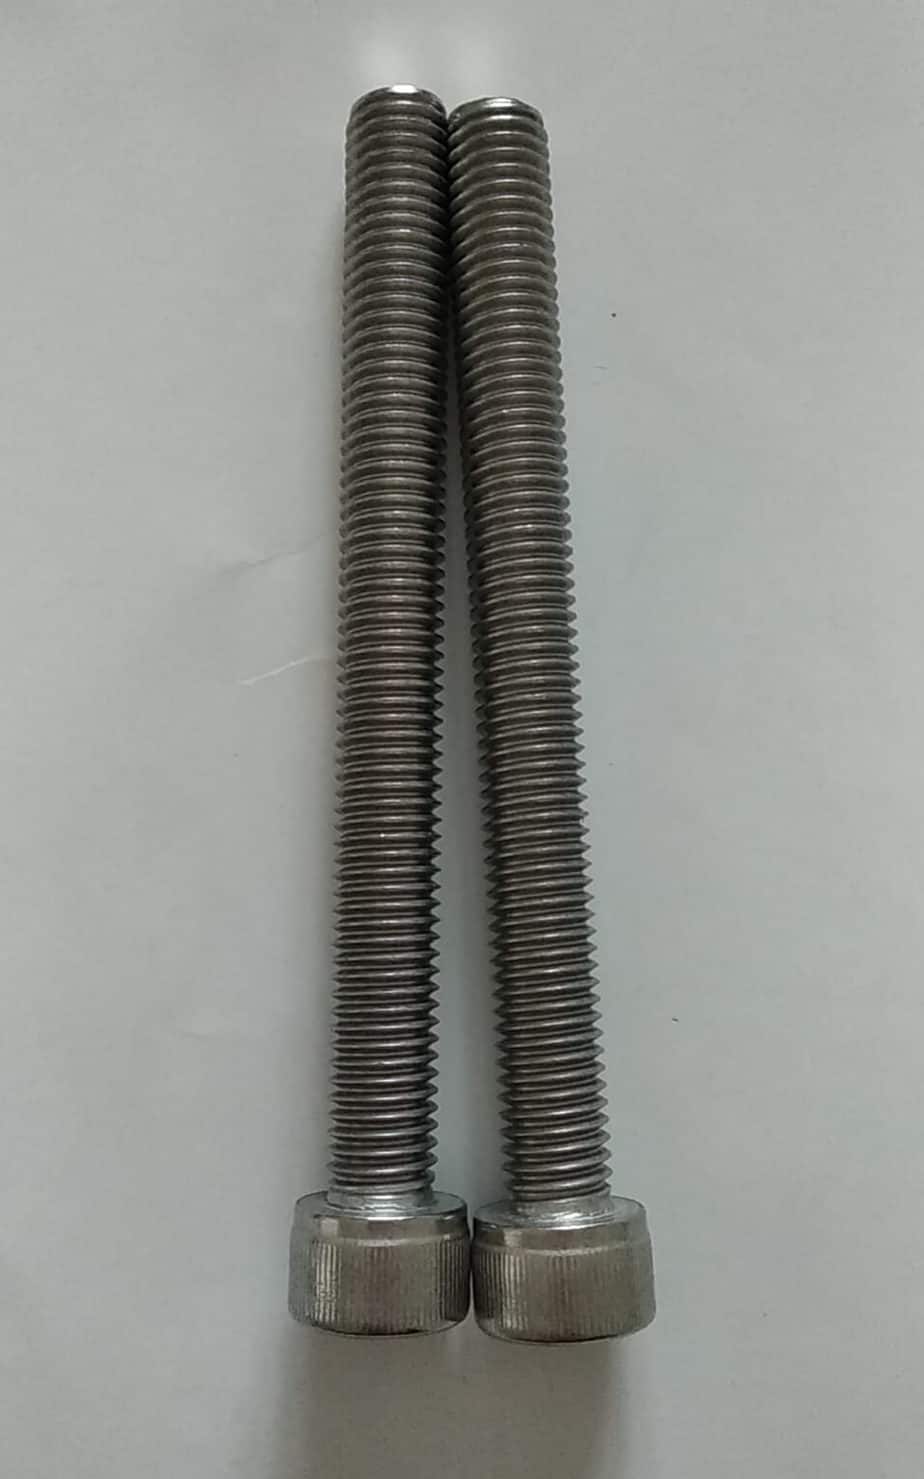 DIN912, M10X120mm Stainless steel 304 Socket Heasd Cap Screw_How to attach climbing holds to climbing wall?